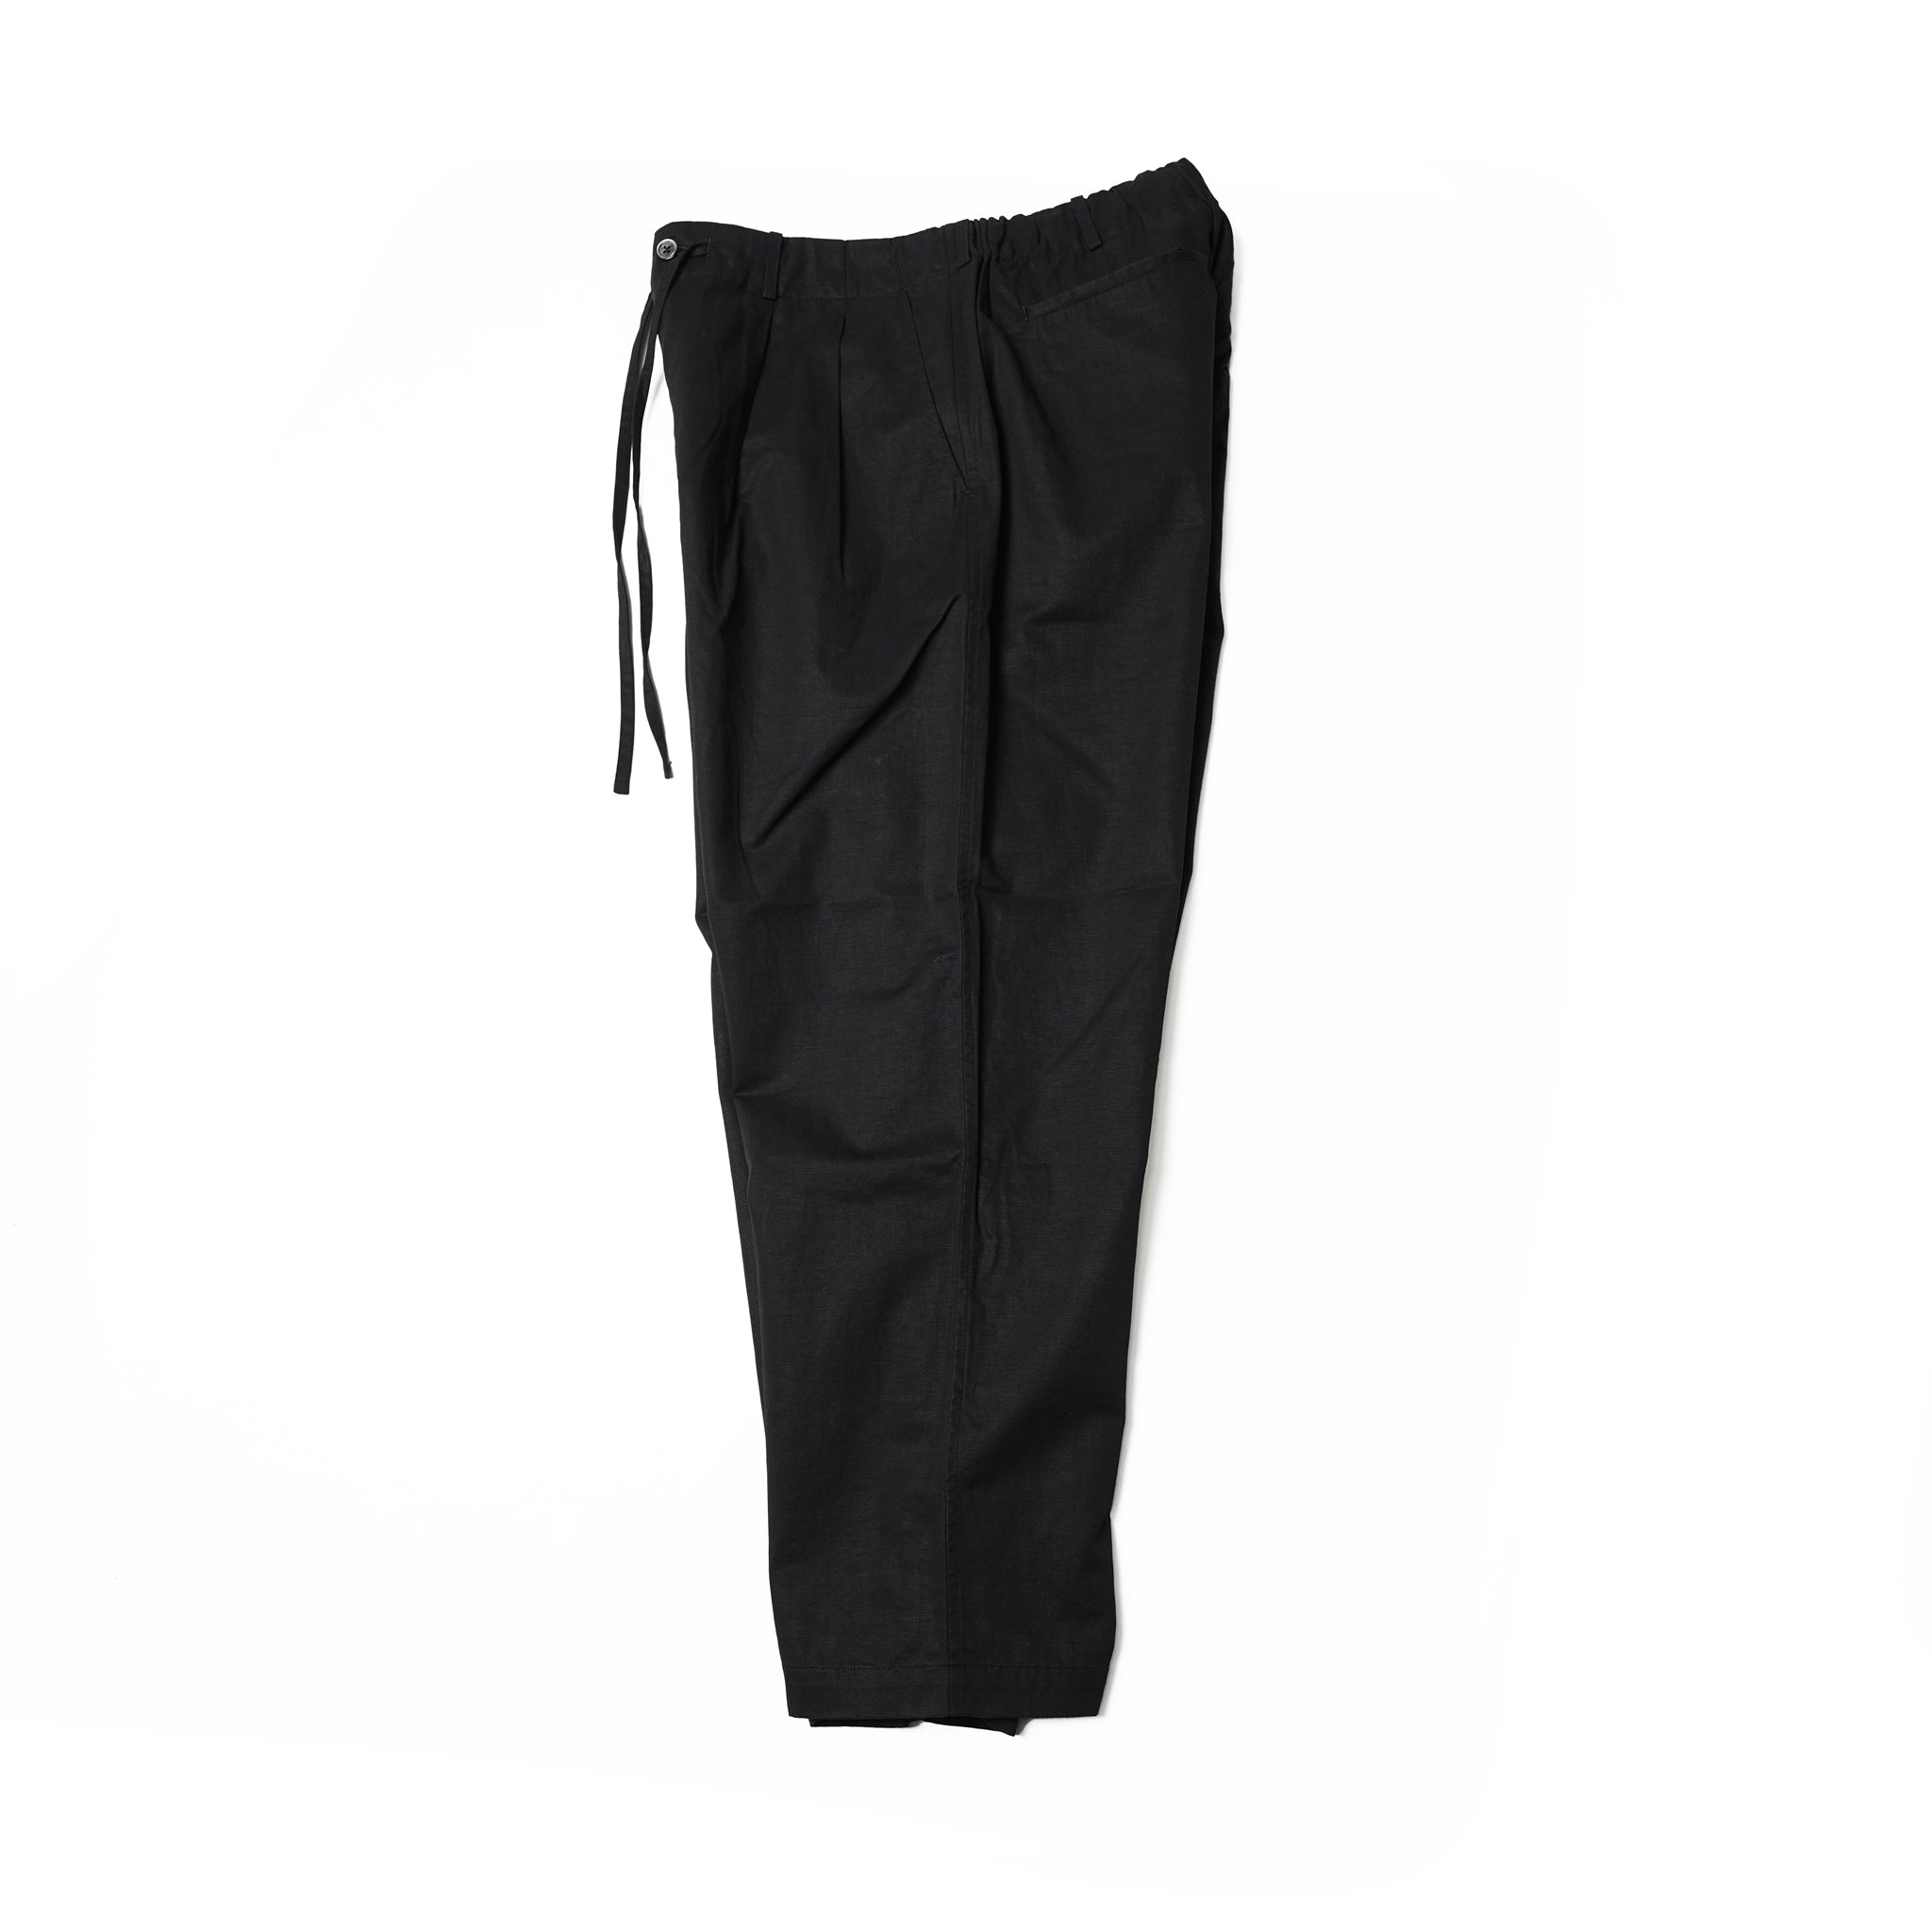 No:BE-03 | Name:BAGS EASY PANTS-COTTON LINEN TWILL | Color:Black【CATTA_カッタ】